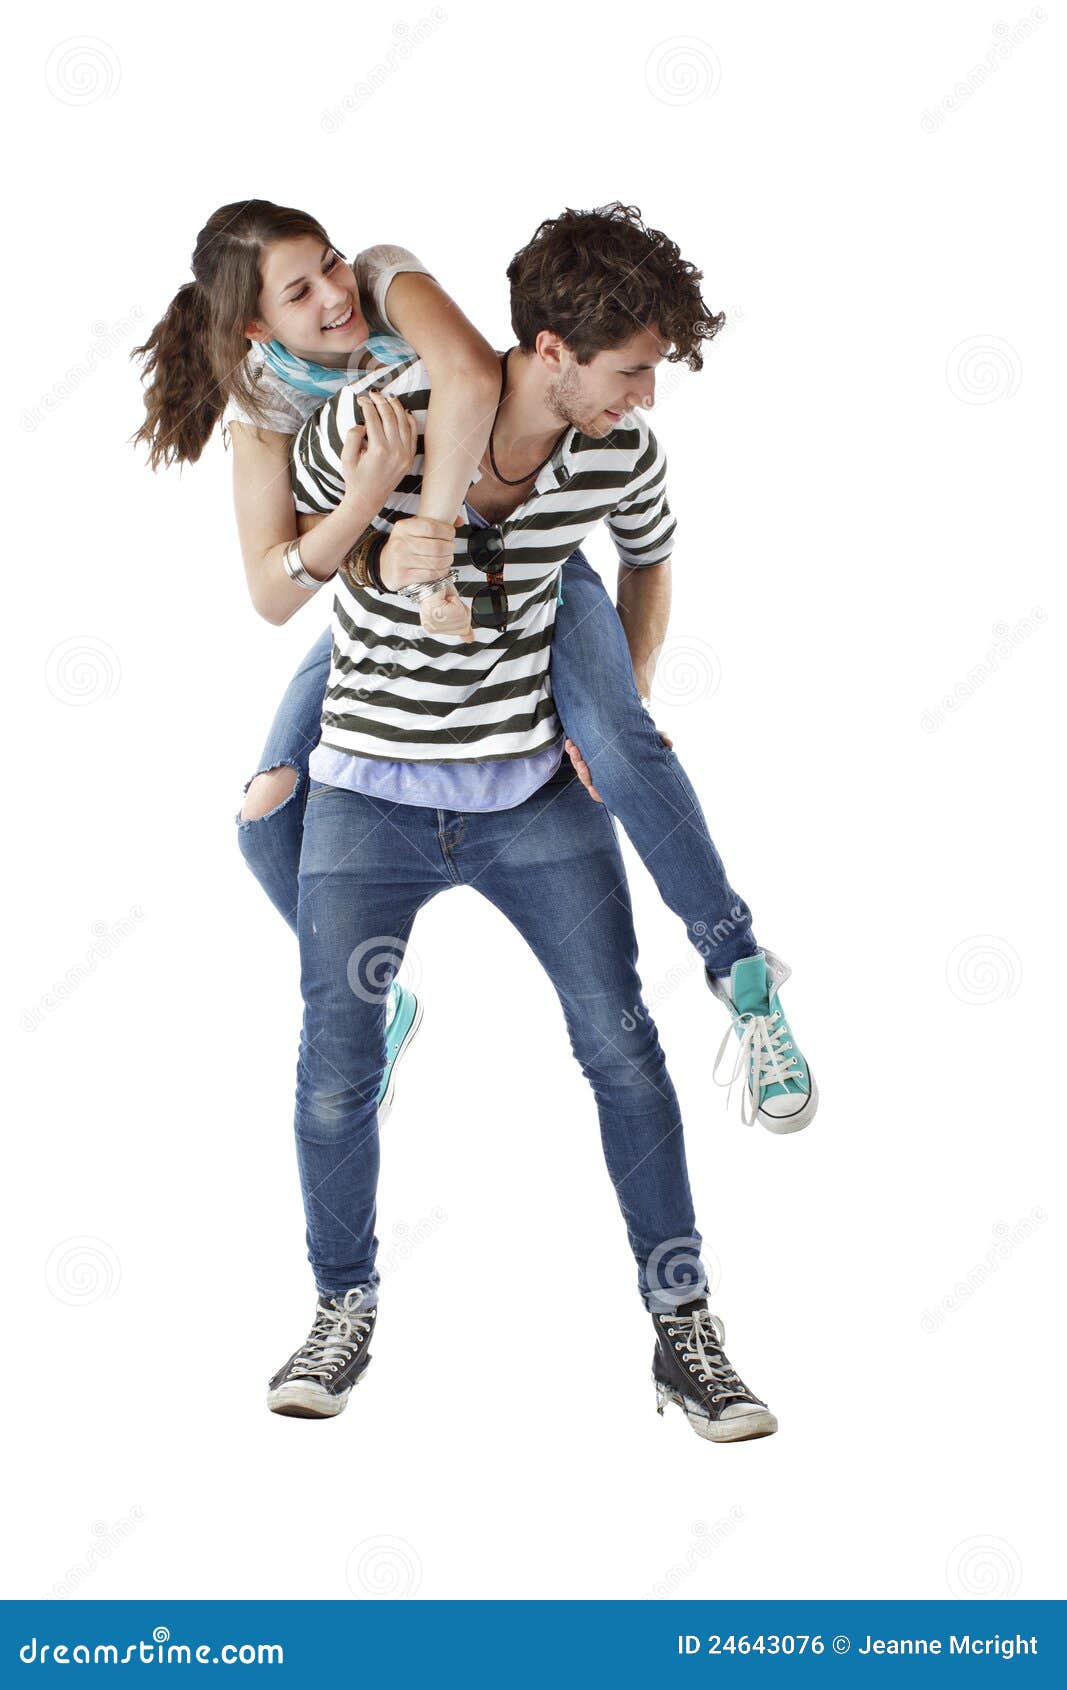 Laughing Playful Teen Couple Stock Photo picture picture pic